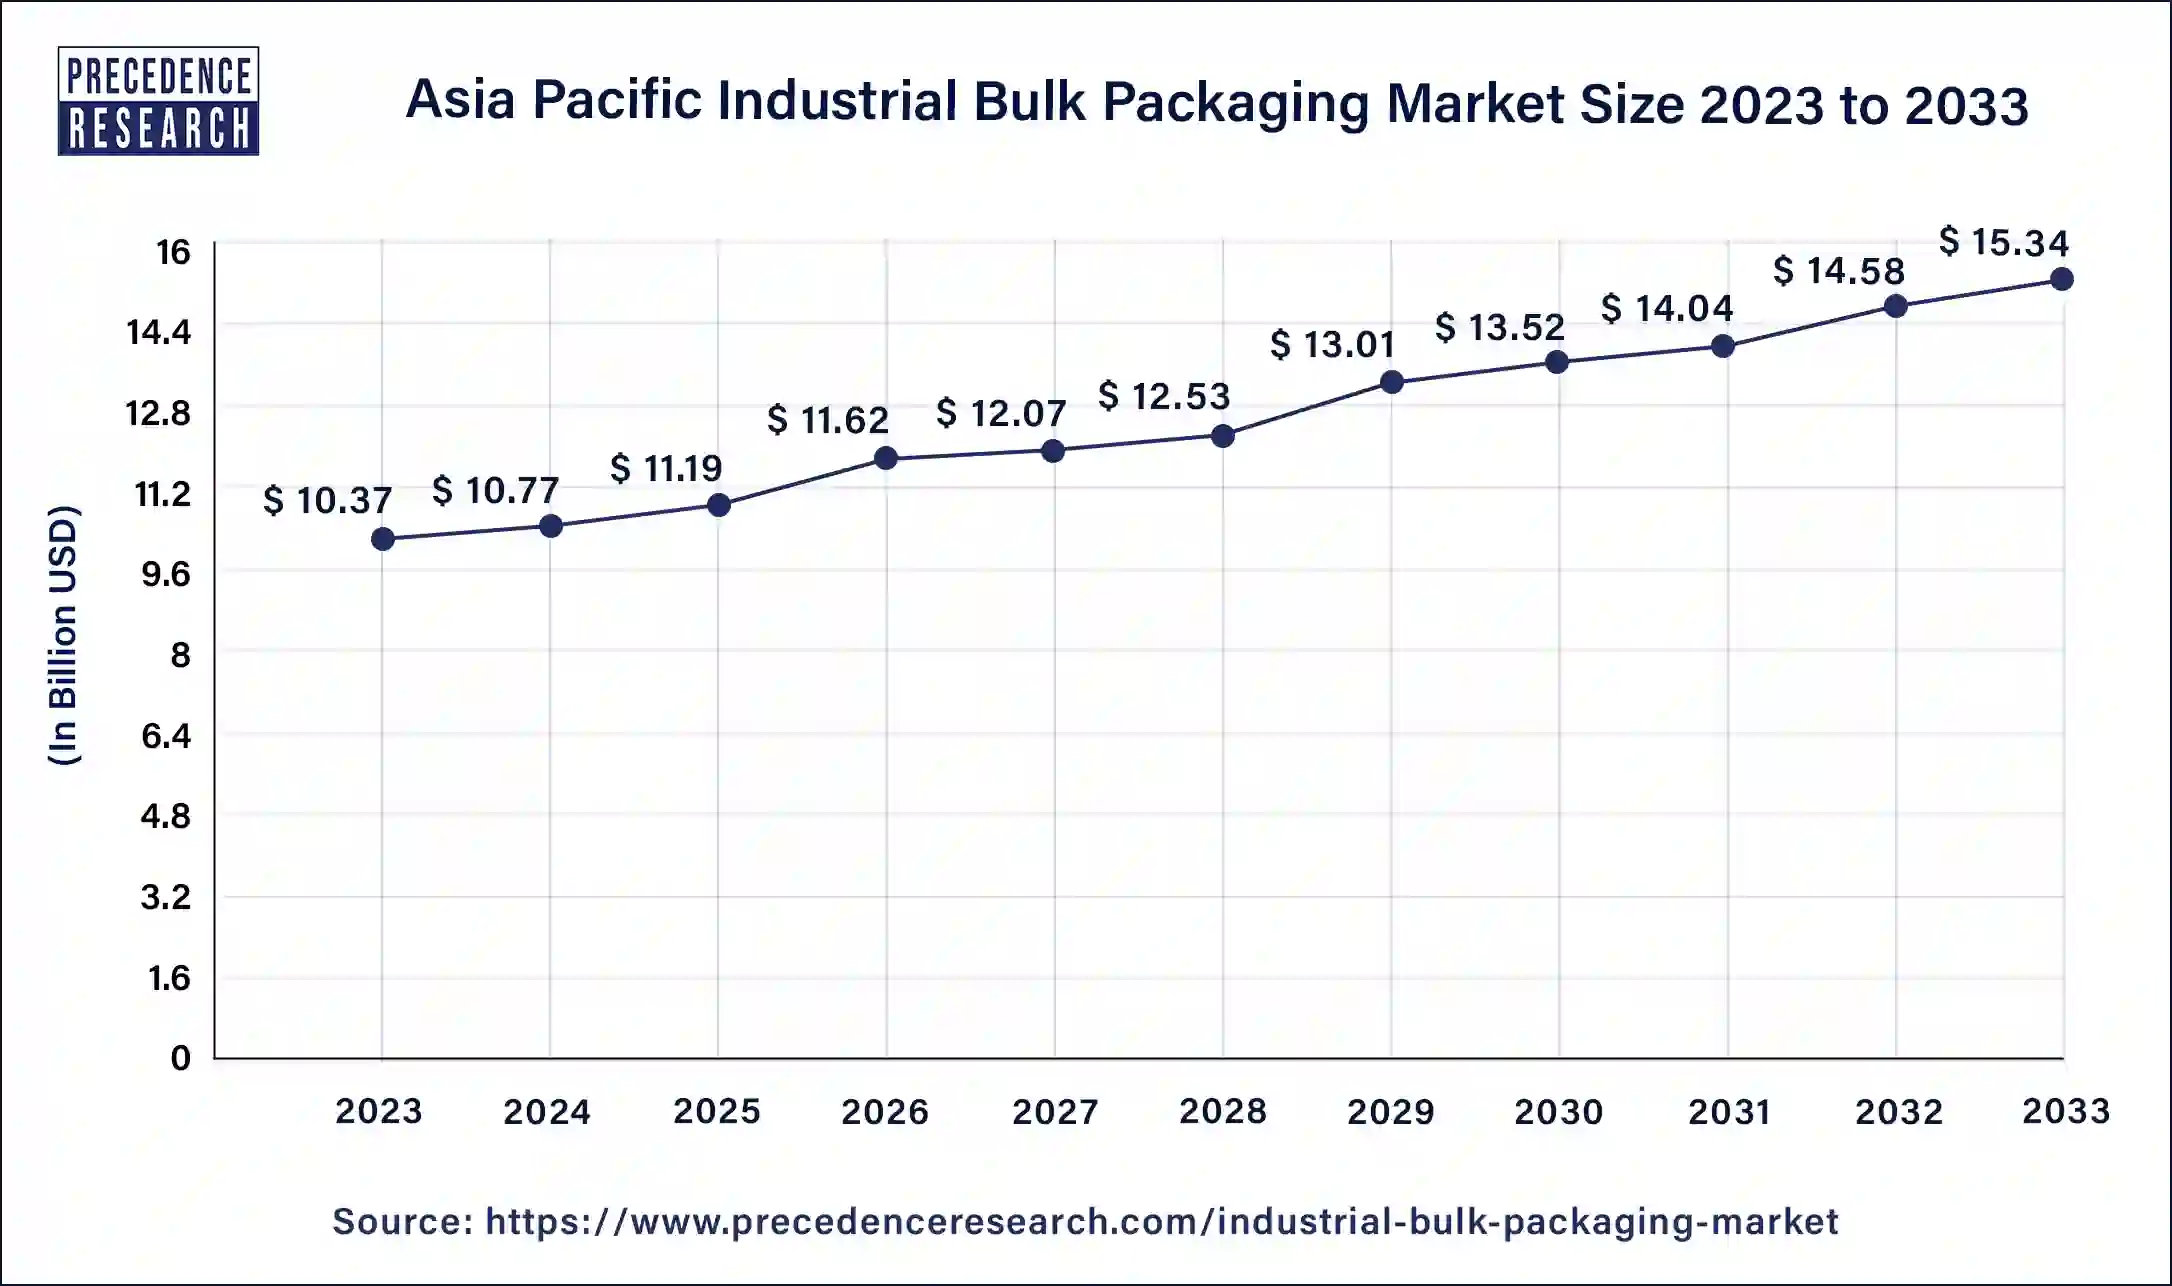 Asia Pacific Industrial Bulk Packaging Market Size 2024 to 2033